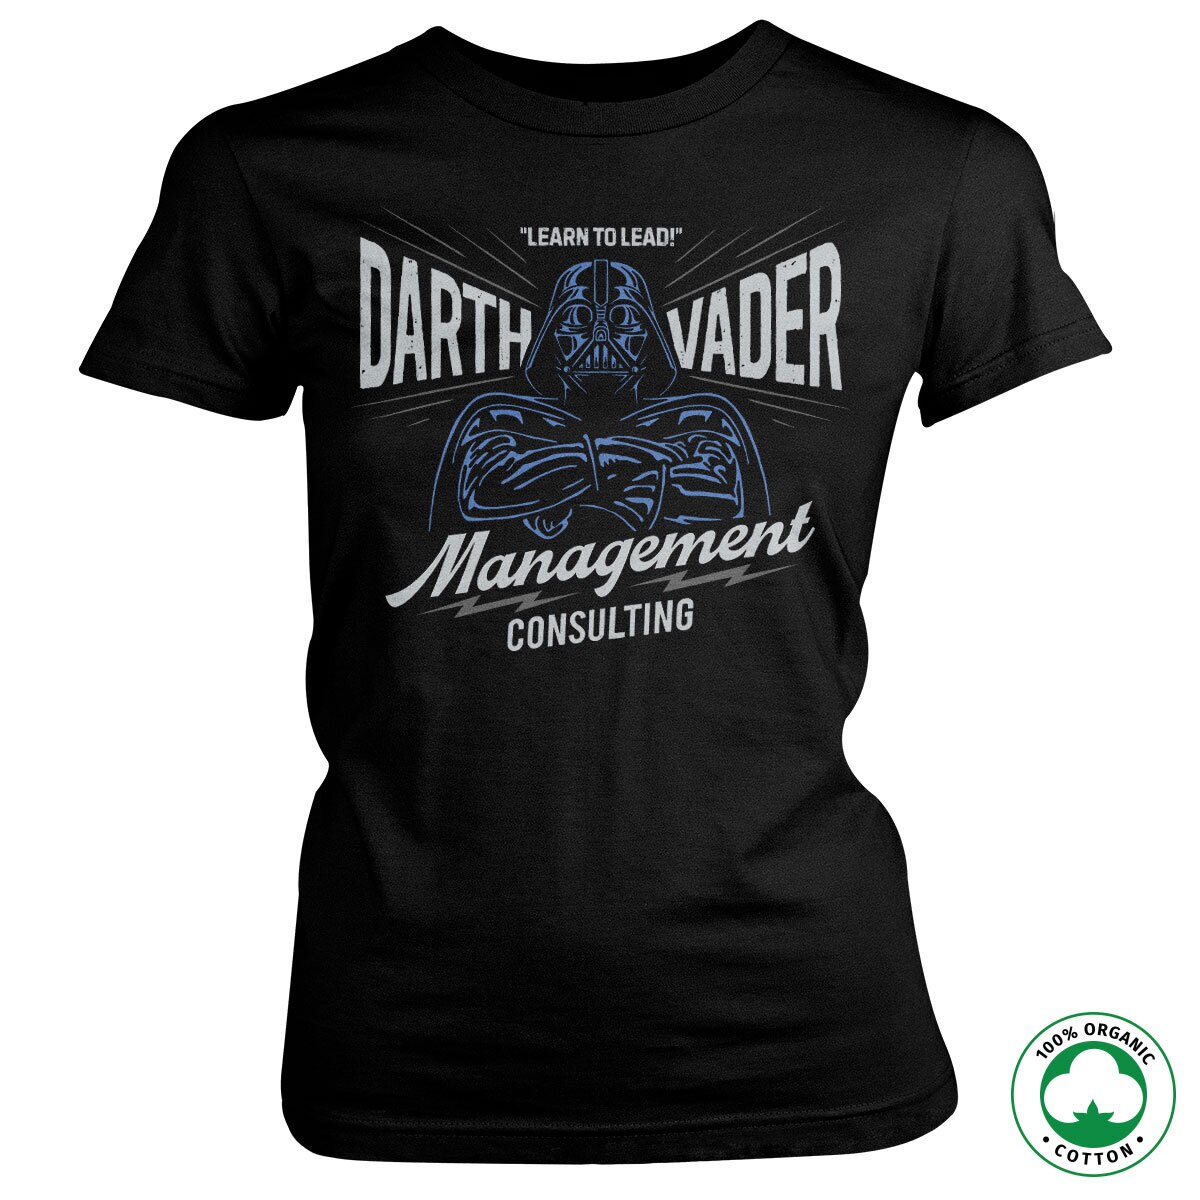 Darth Vader Management Consulting Organic Girly Tee